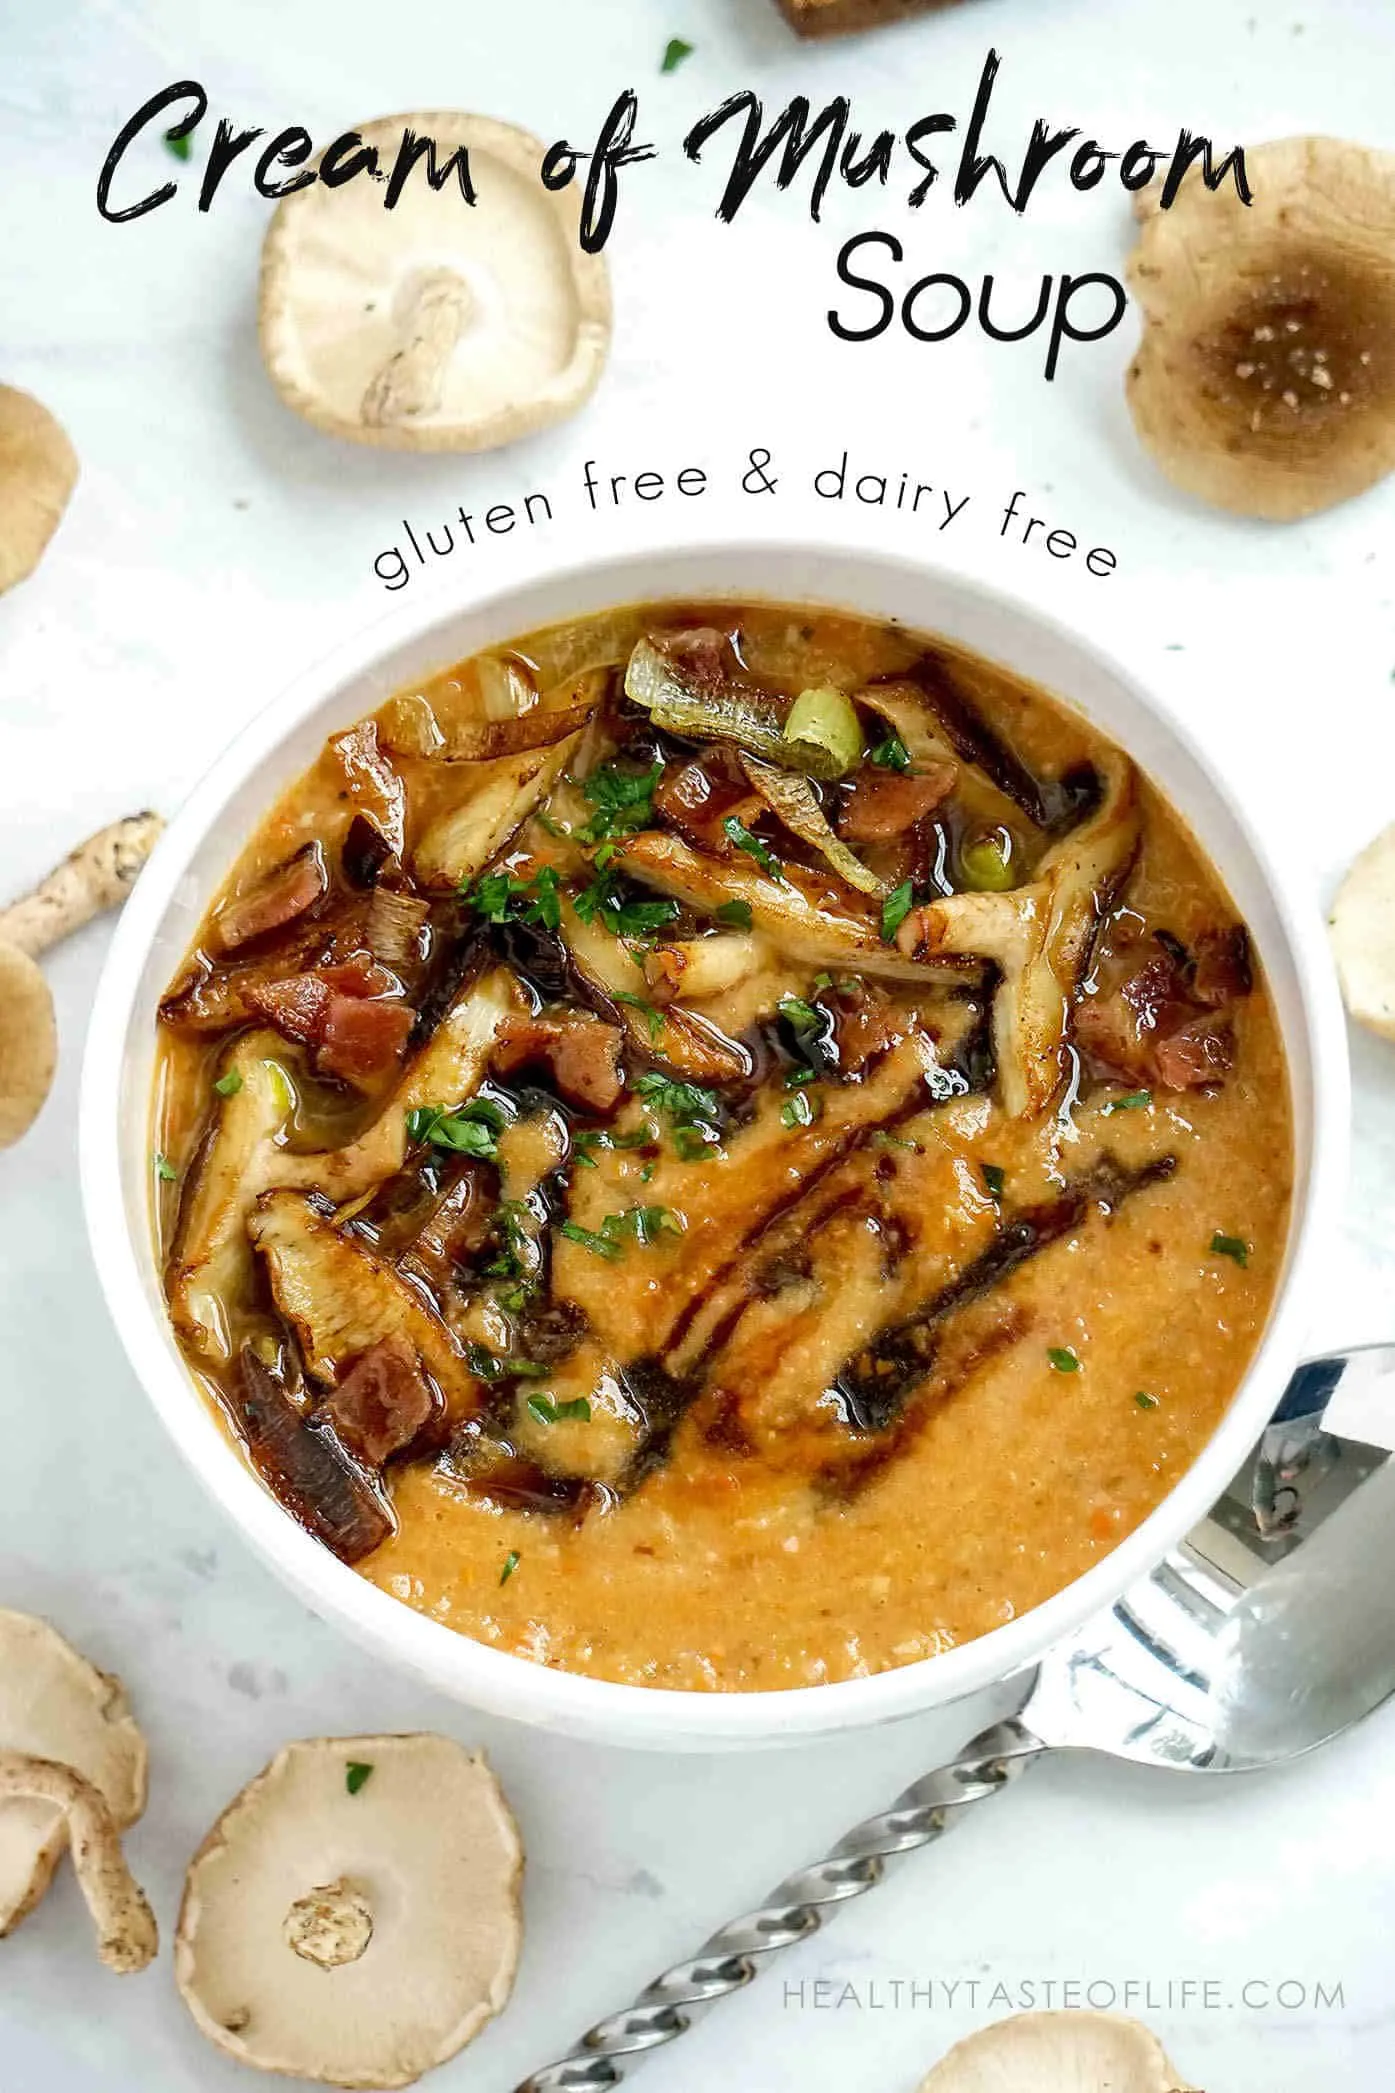 Healthy creamy shiitake mushroom soup recipe - it has a rich "creamy" taste without using any dairy or non dairy ingredients, thickening agents or flour.  It's full of health benefits due to immune boosting shiitake mushrooms. #shiitake #mushroom #soup #healthy